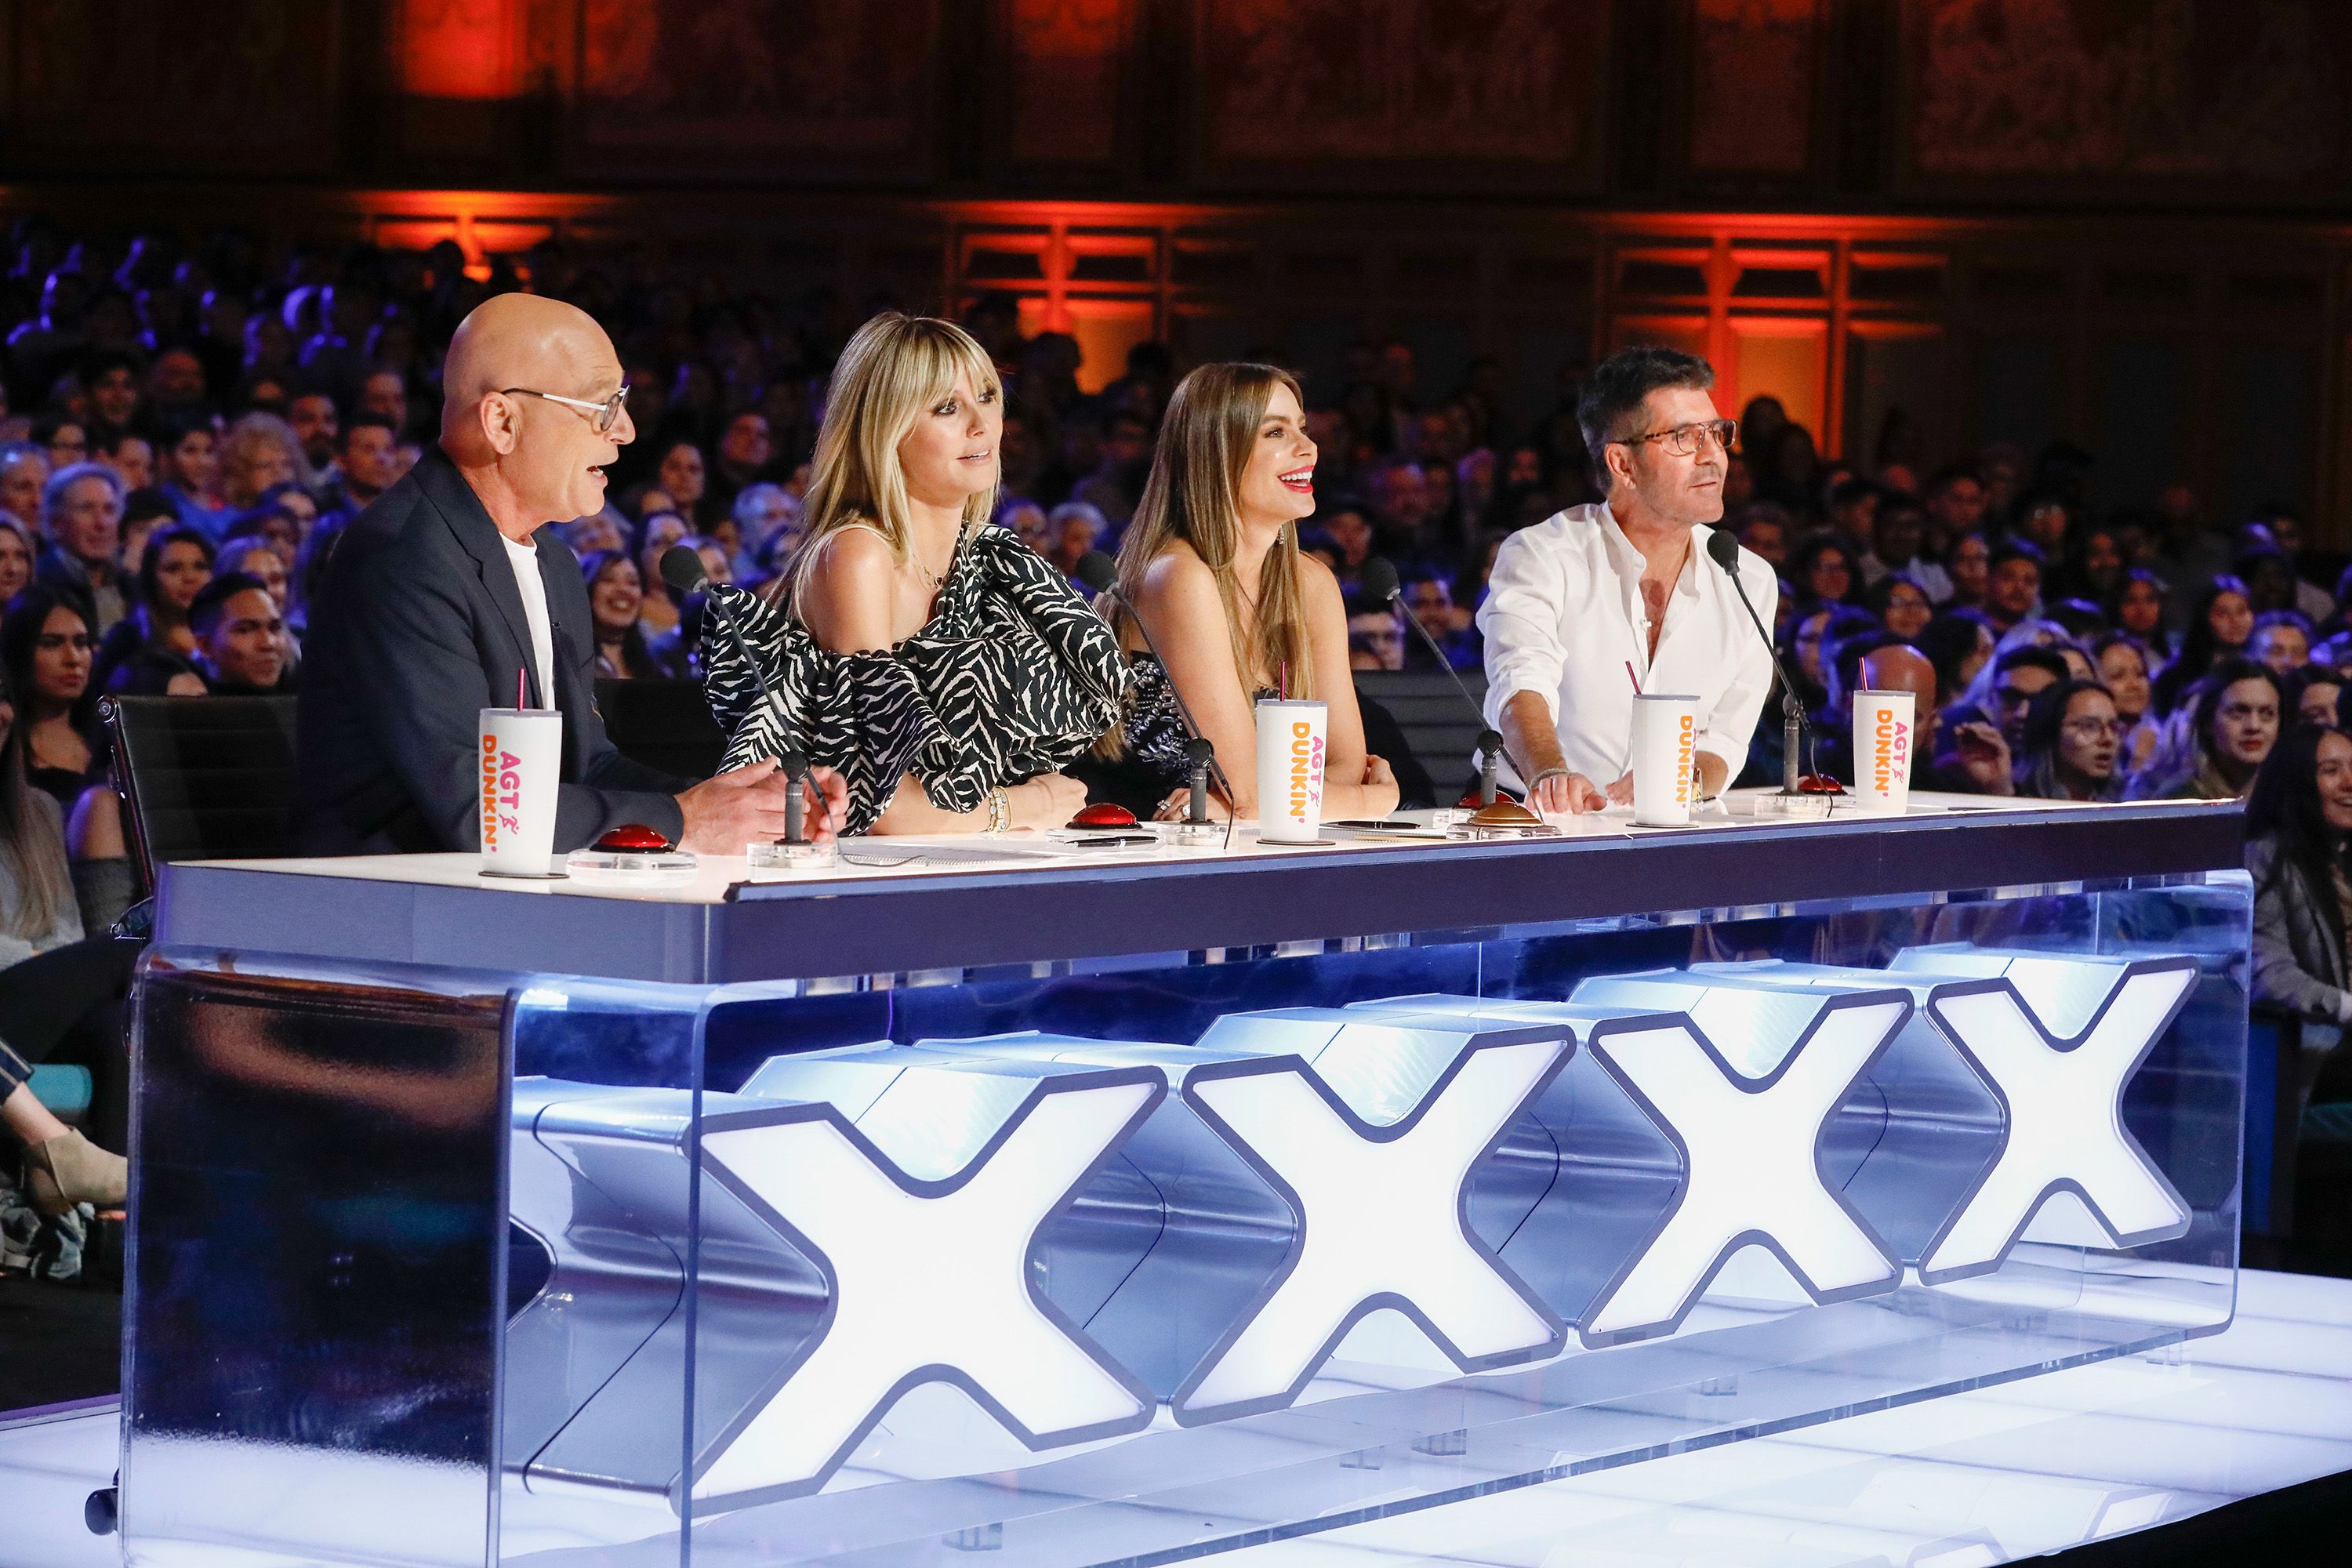 Howie Mandel, Heidi Klum, Sofia Vergara, and Simon Cowell during the "America's Got Talent" Episode 1501 on March 02, 2020 | Photo: Getty Images